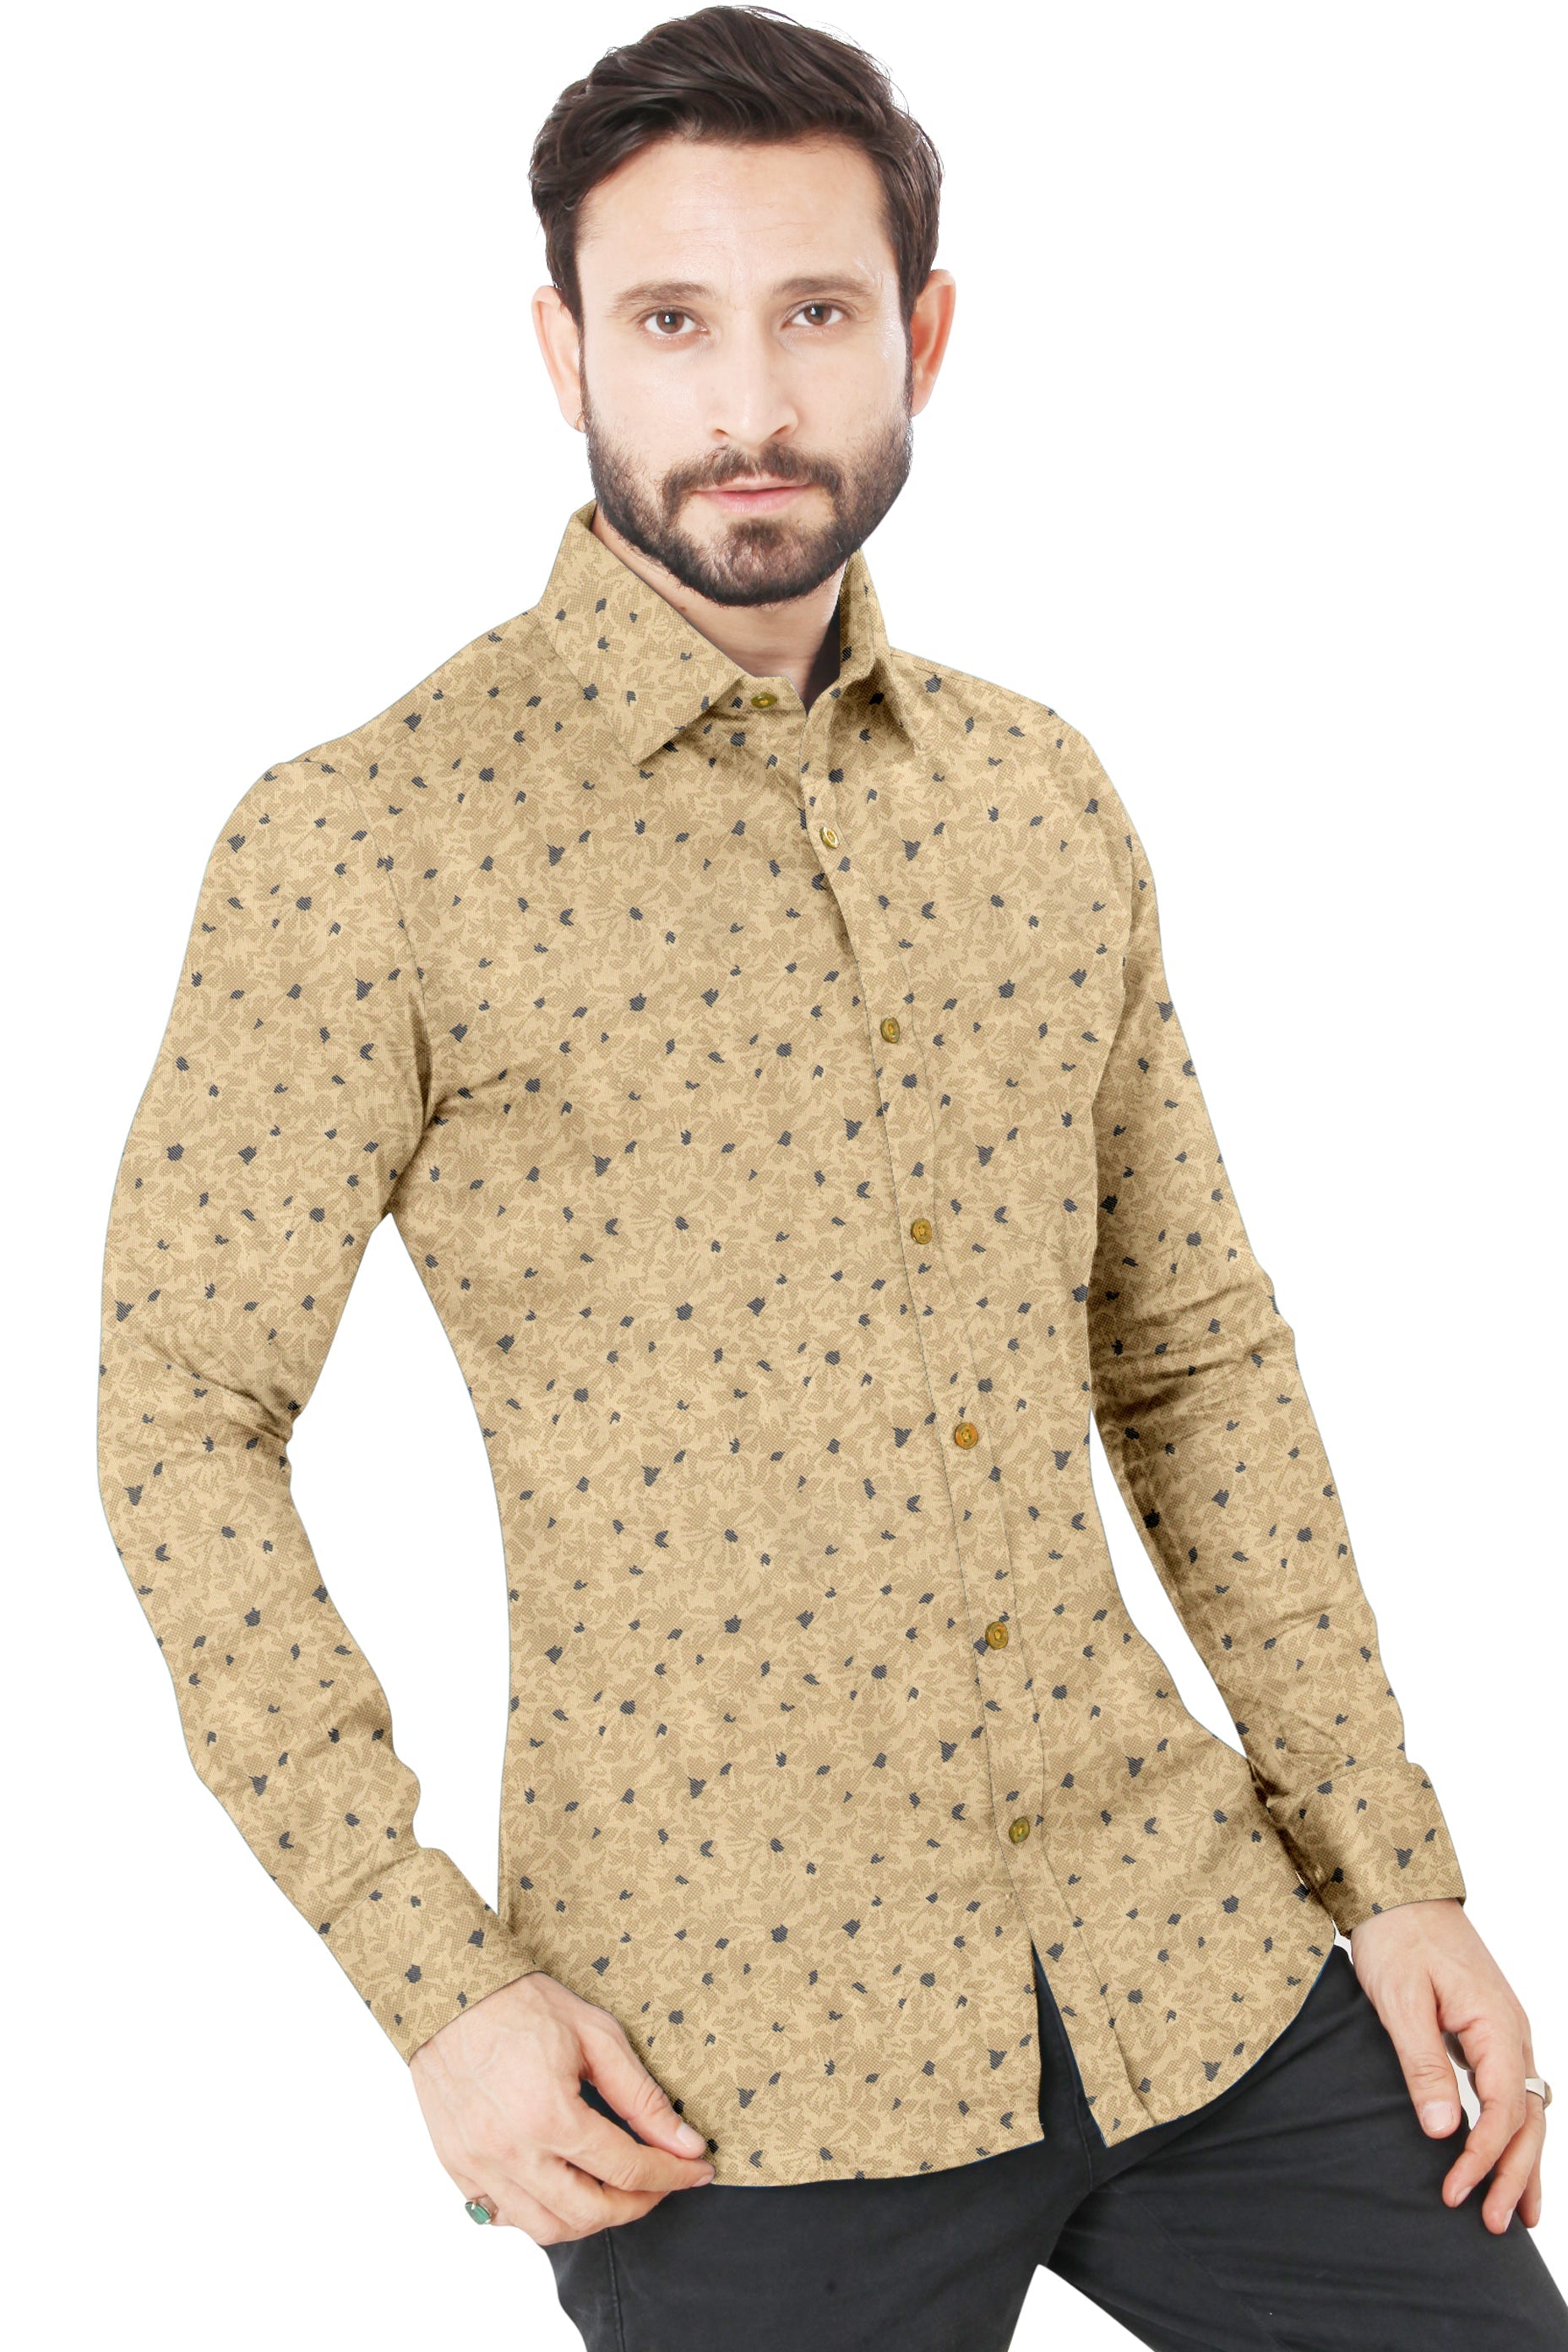 Men's Yellow Printed Casual Full Sleeves 100% Cotton 